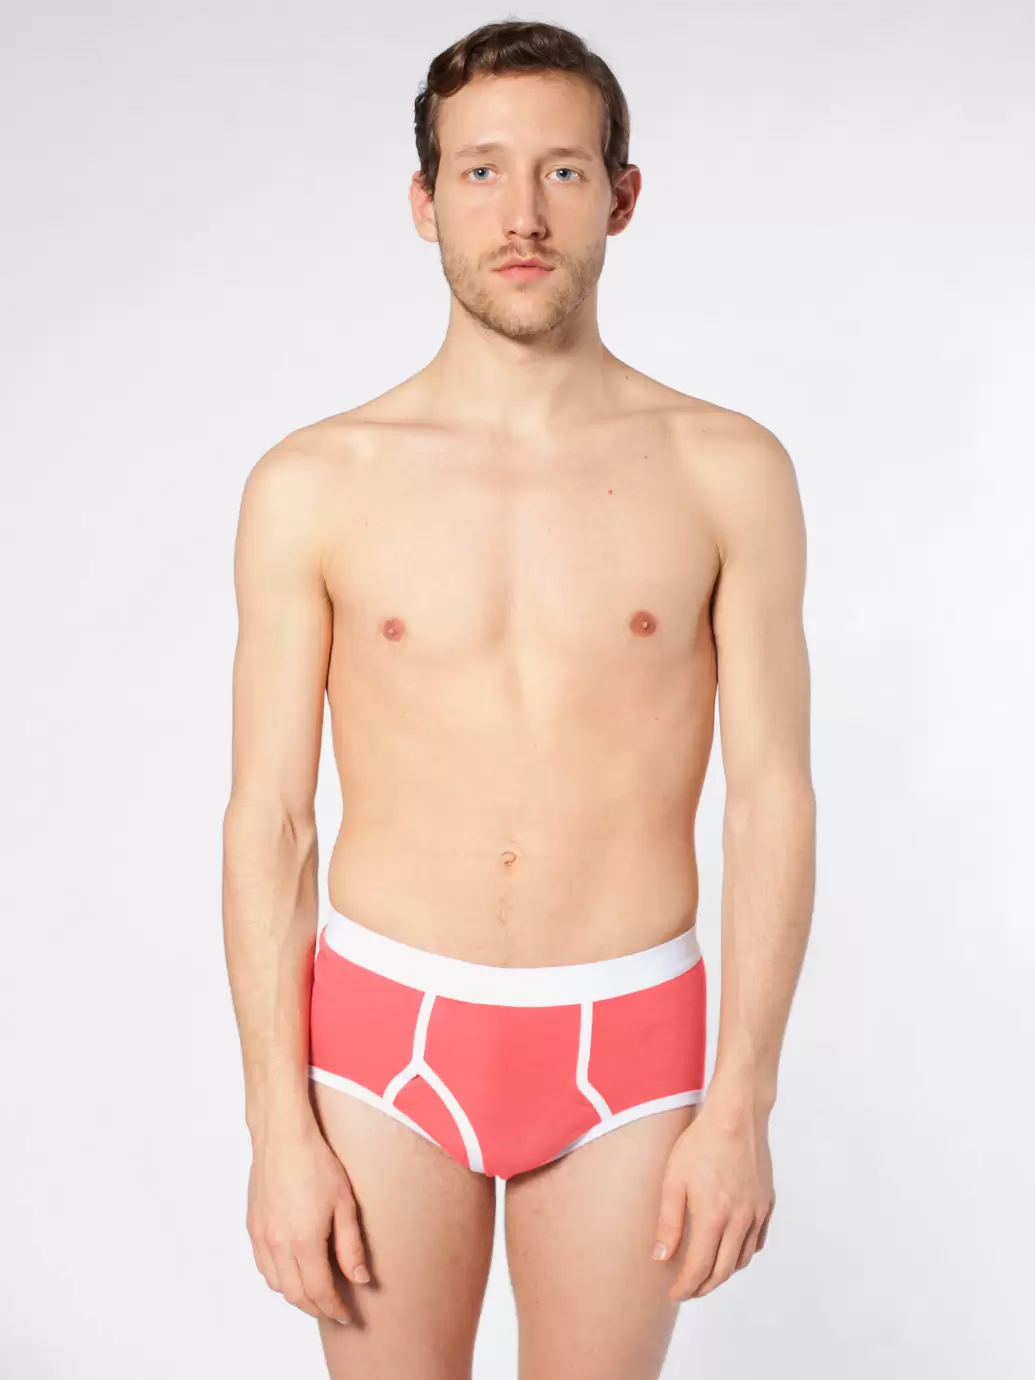 American Apparel on X: 100% cotton pullovers and briefs by